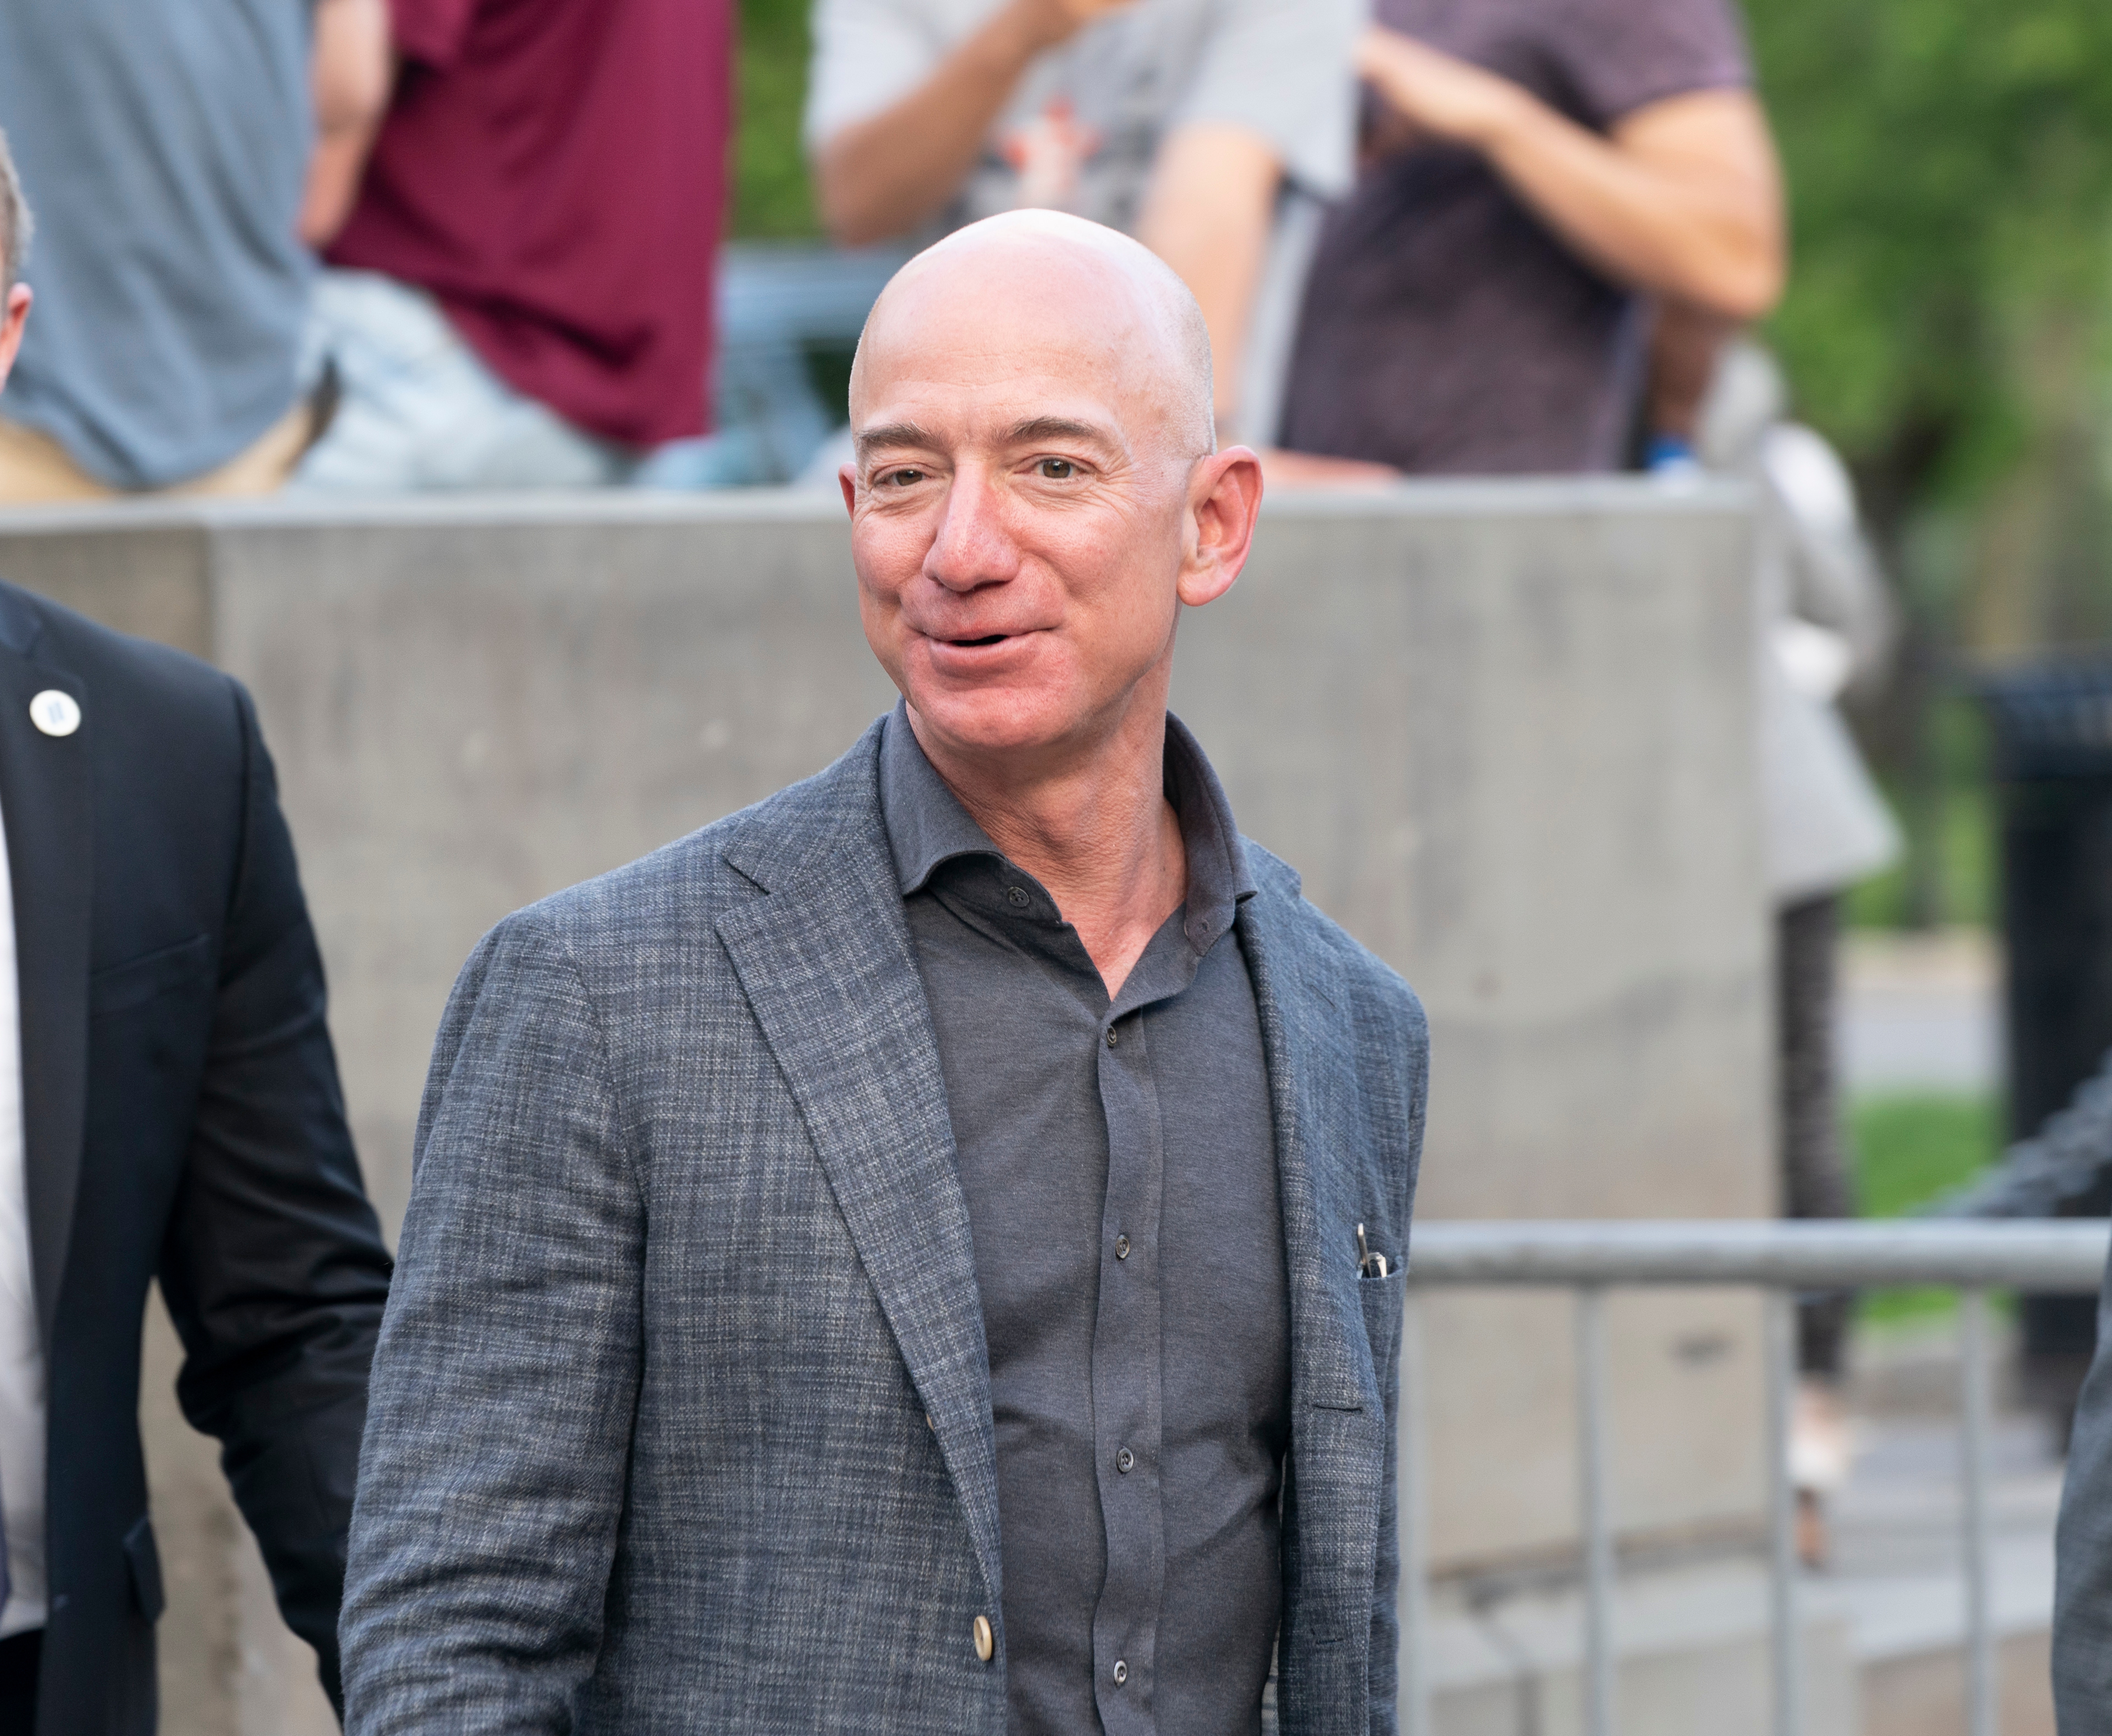 A Look At The Startups Jeff Bezos Has Invested In This Year - Most Have This One Thing In Common